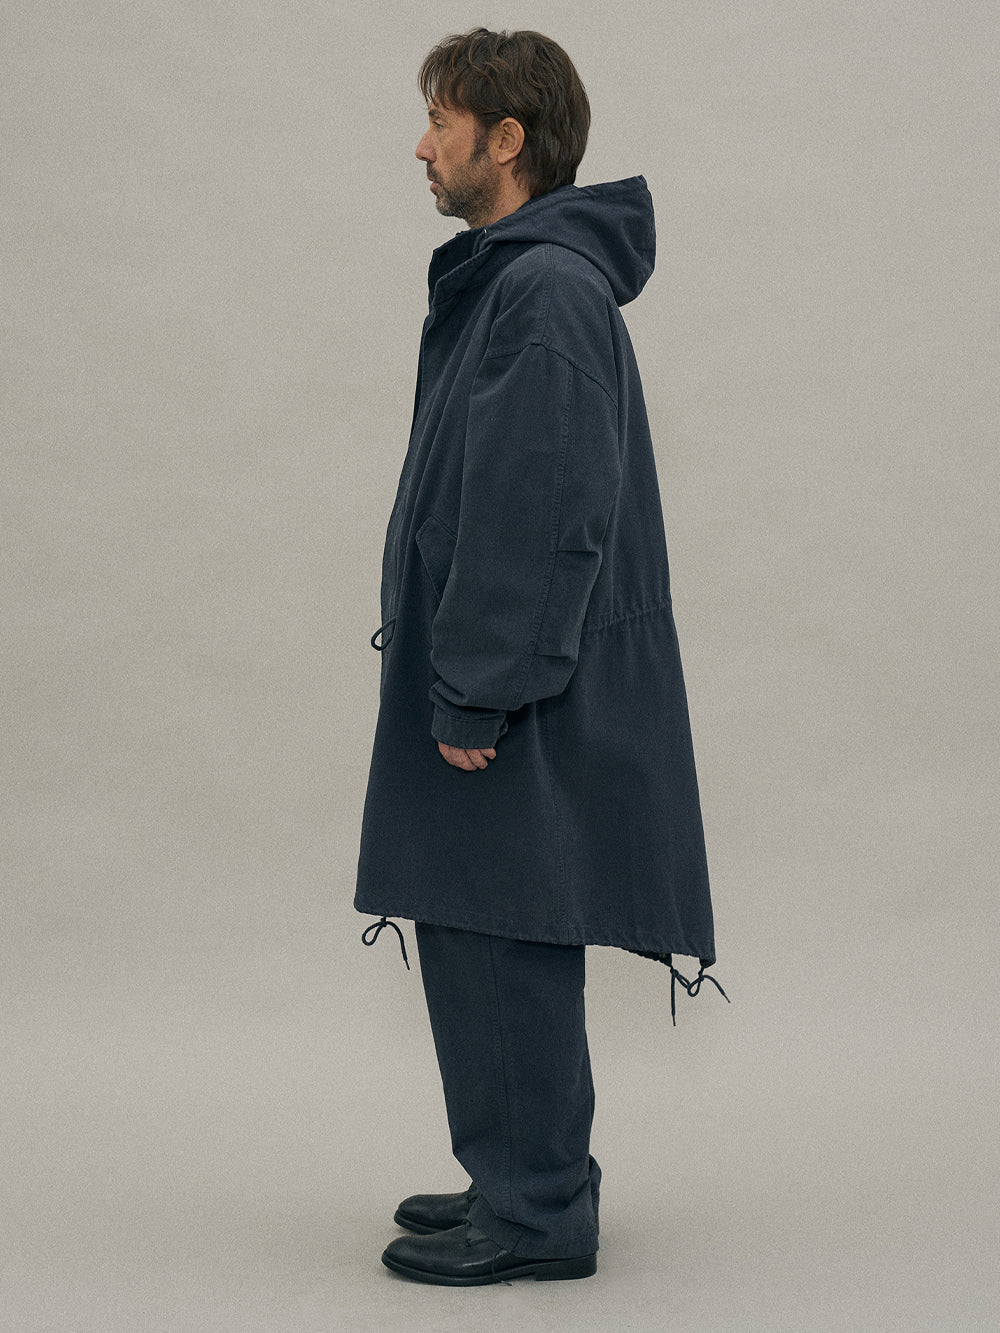 Vintage Washed M-65 Fishtail Coat in Navy